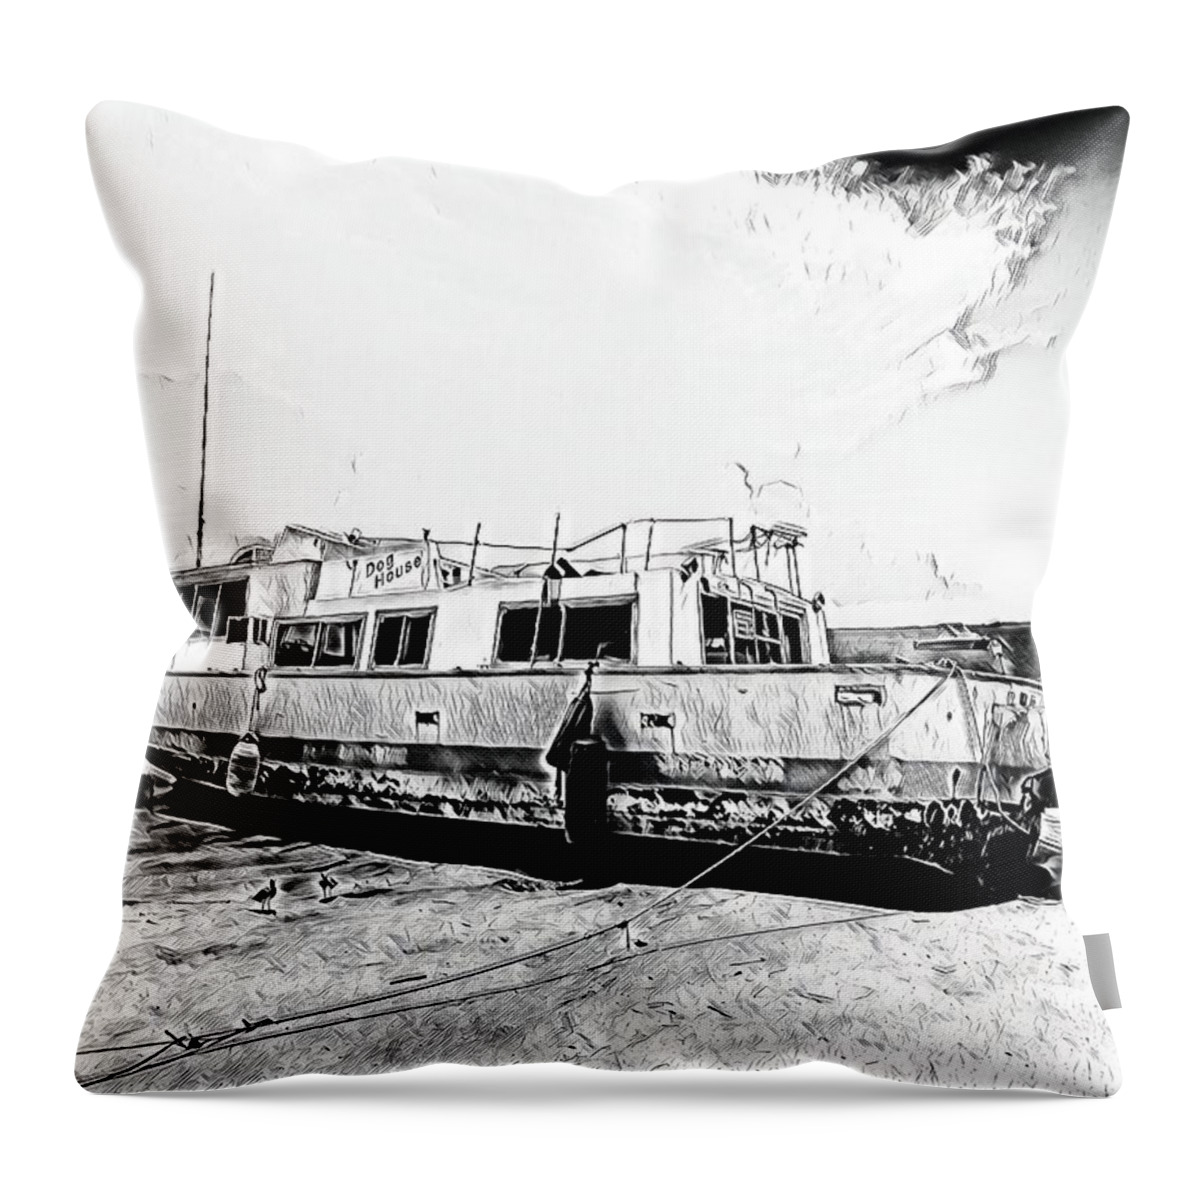 Boat Throw Pillow featuring the photograph Beached Vessel by Rick Redman